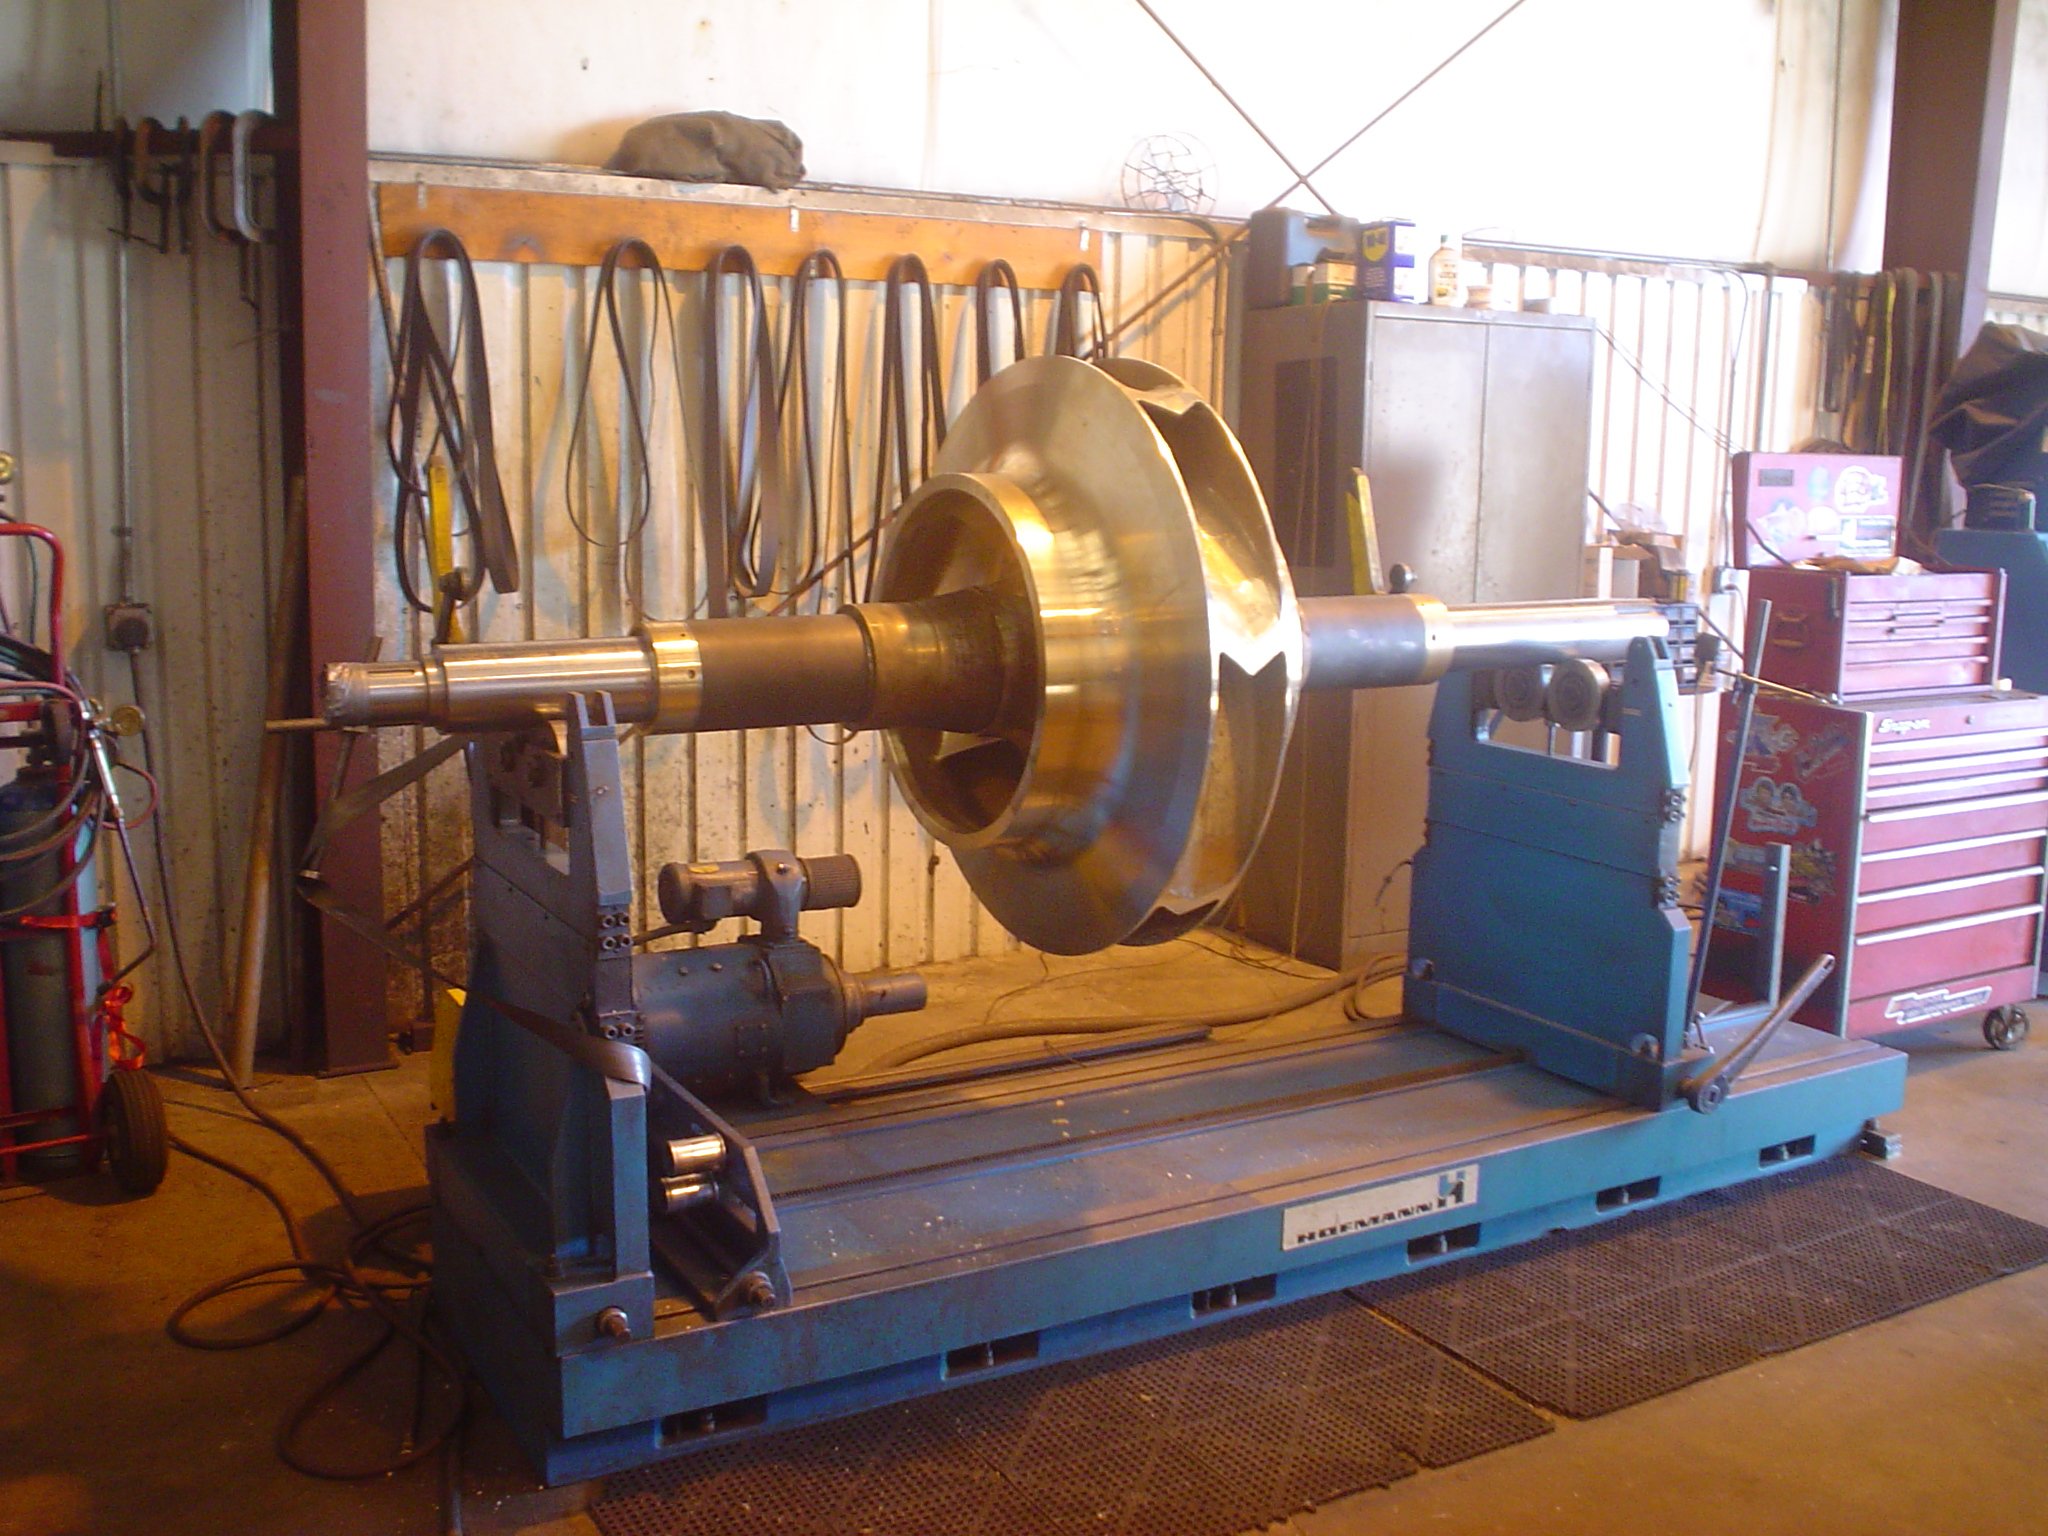 All impellers and rotating elements are dynamically balanced.